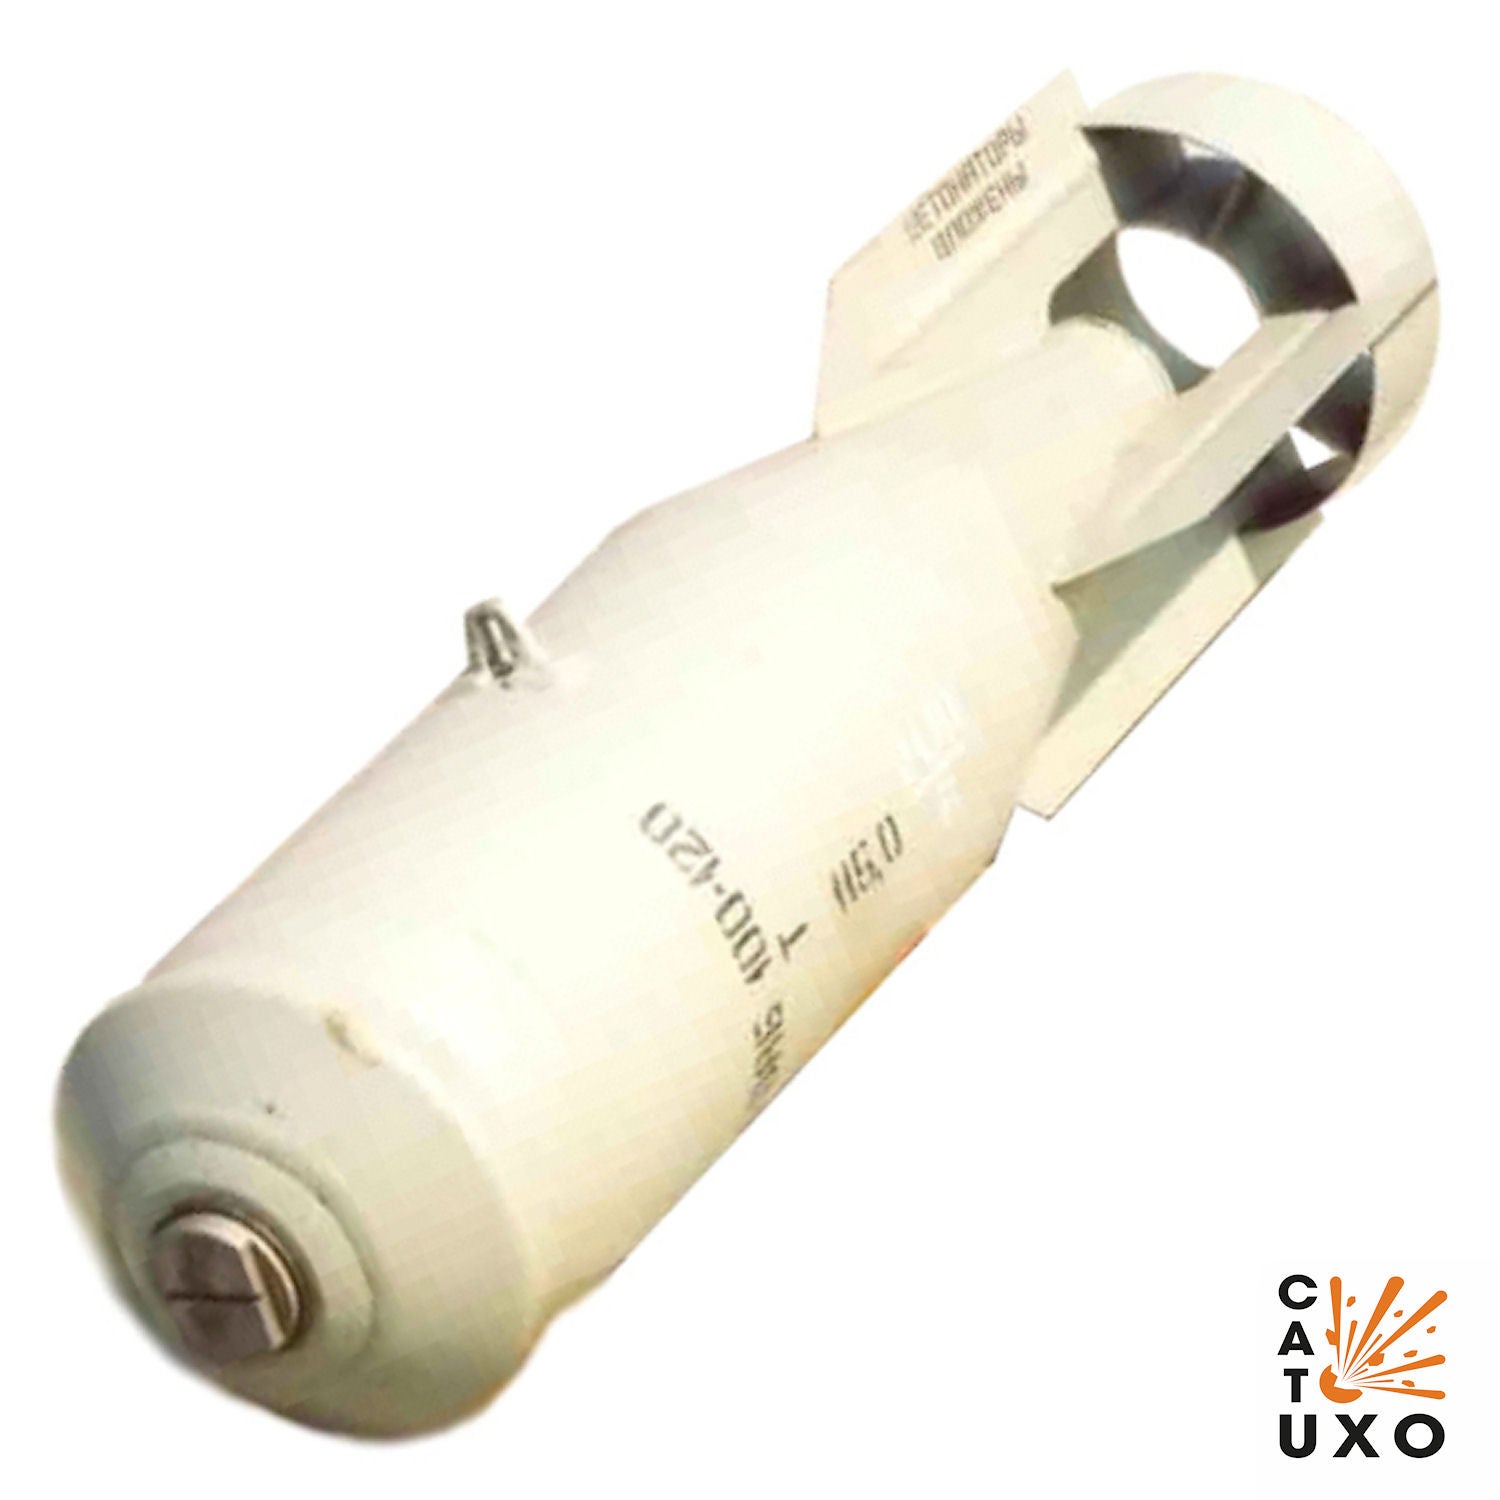 An OFAB-100-120 high-explosive aerial bomb. 